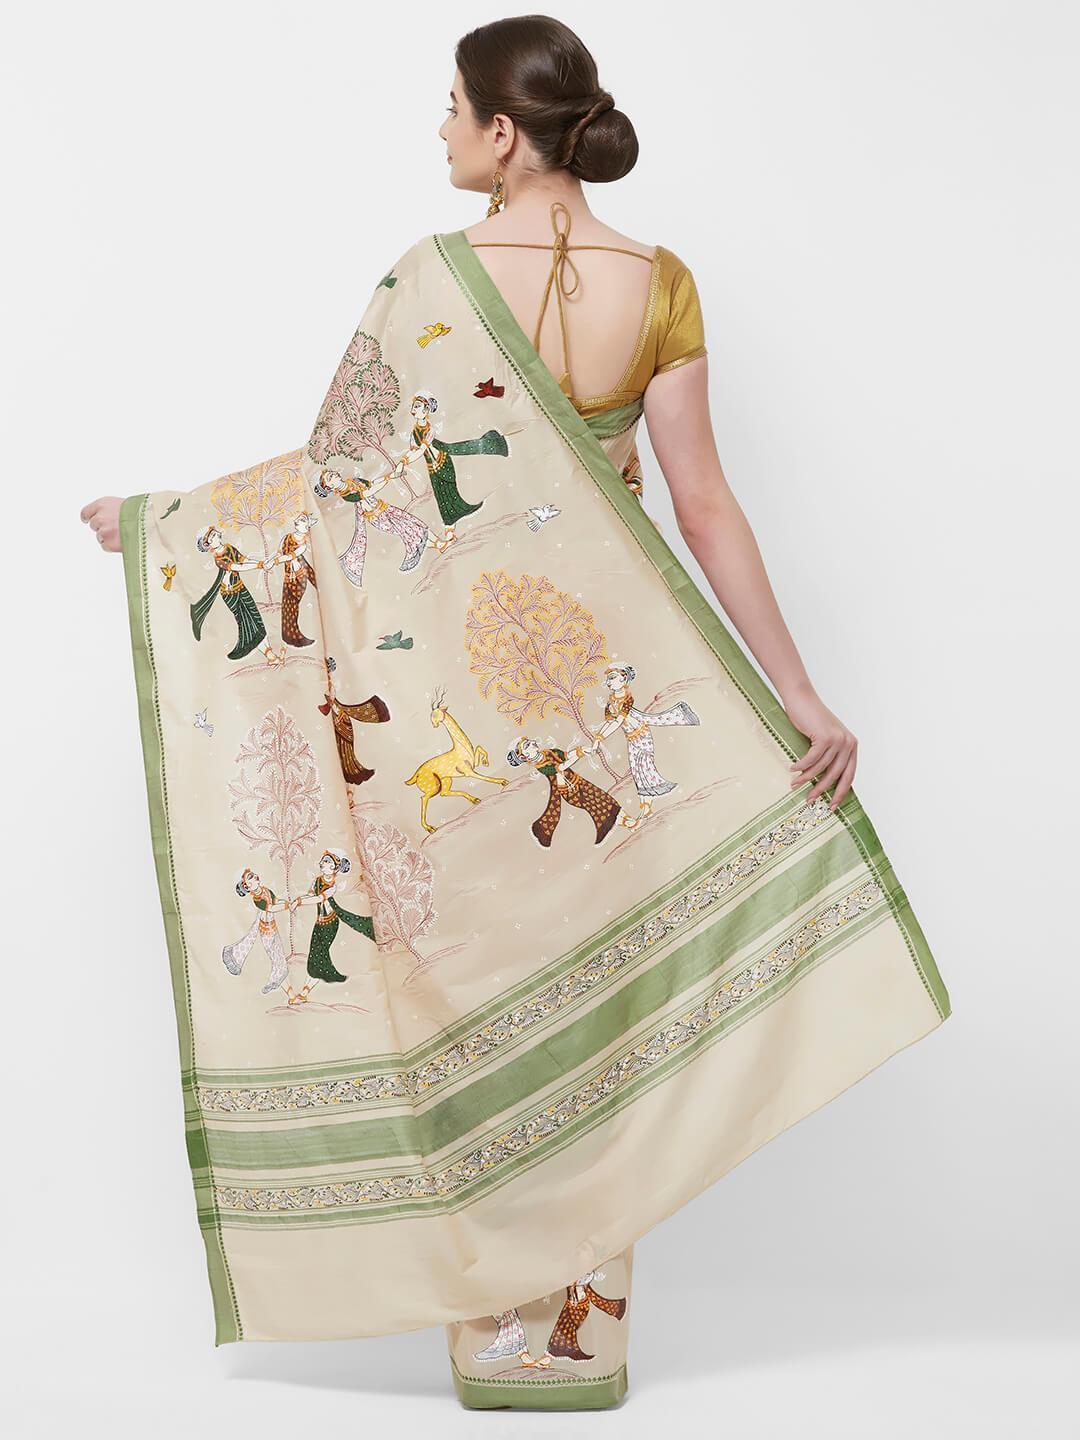 CraftsCollection.in -Beige Cotton Saree with handpainted Pattachitra art